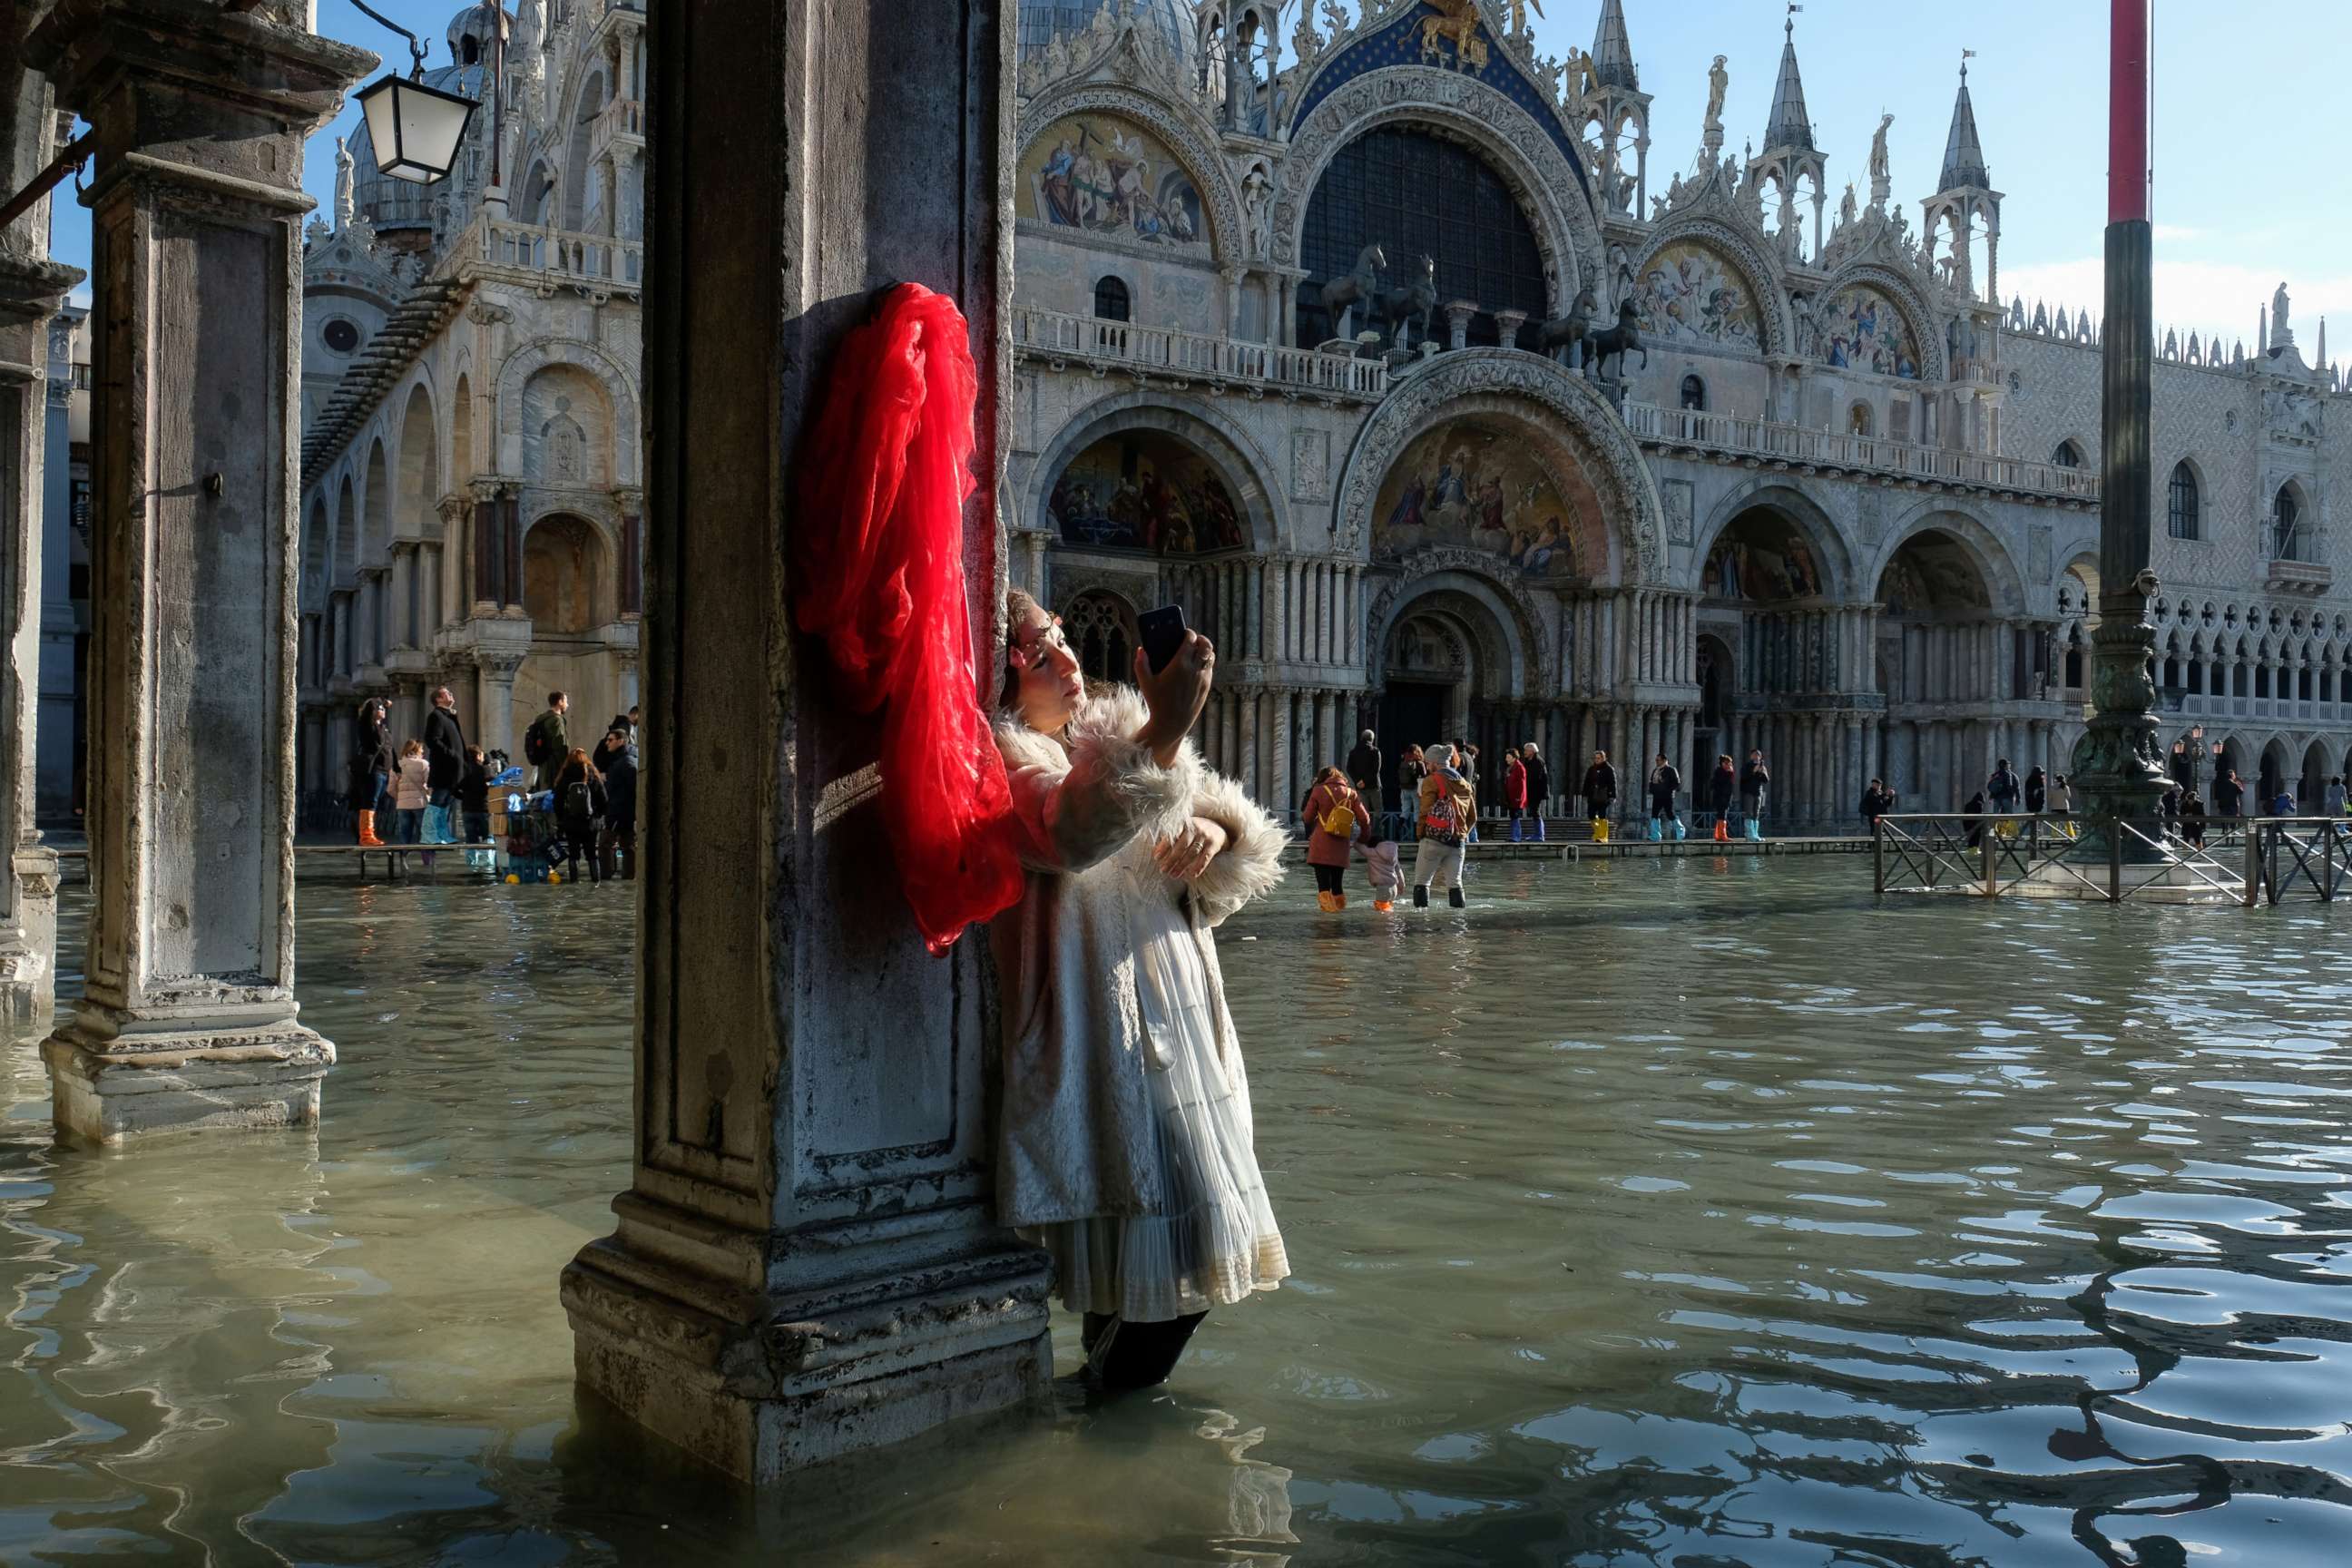 PHOTO: A woman takes pictures in the flooded St. Mark's Square during a period of seasonal high water in Venice, Italy, Nov. 14, 2019.